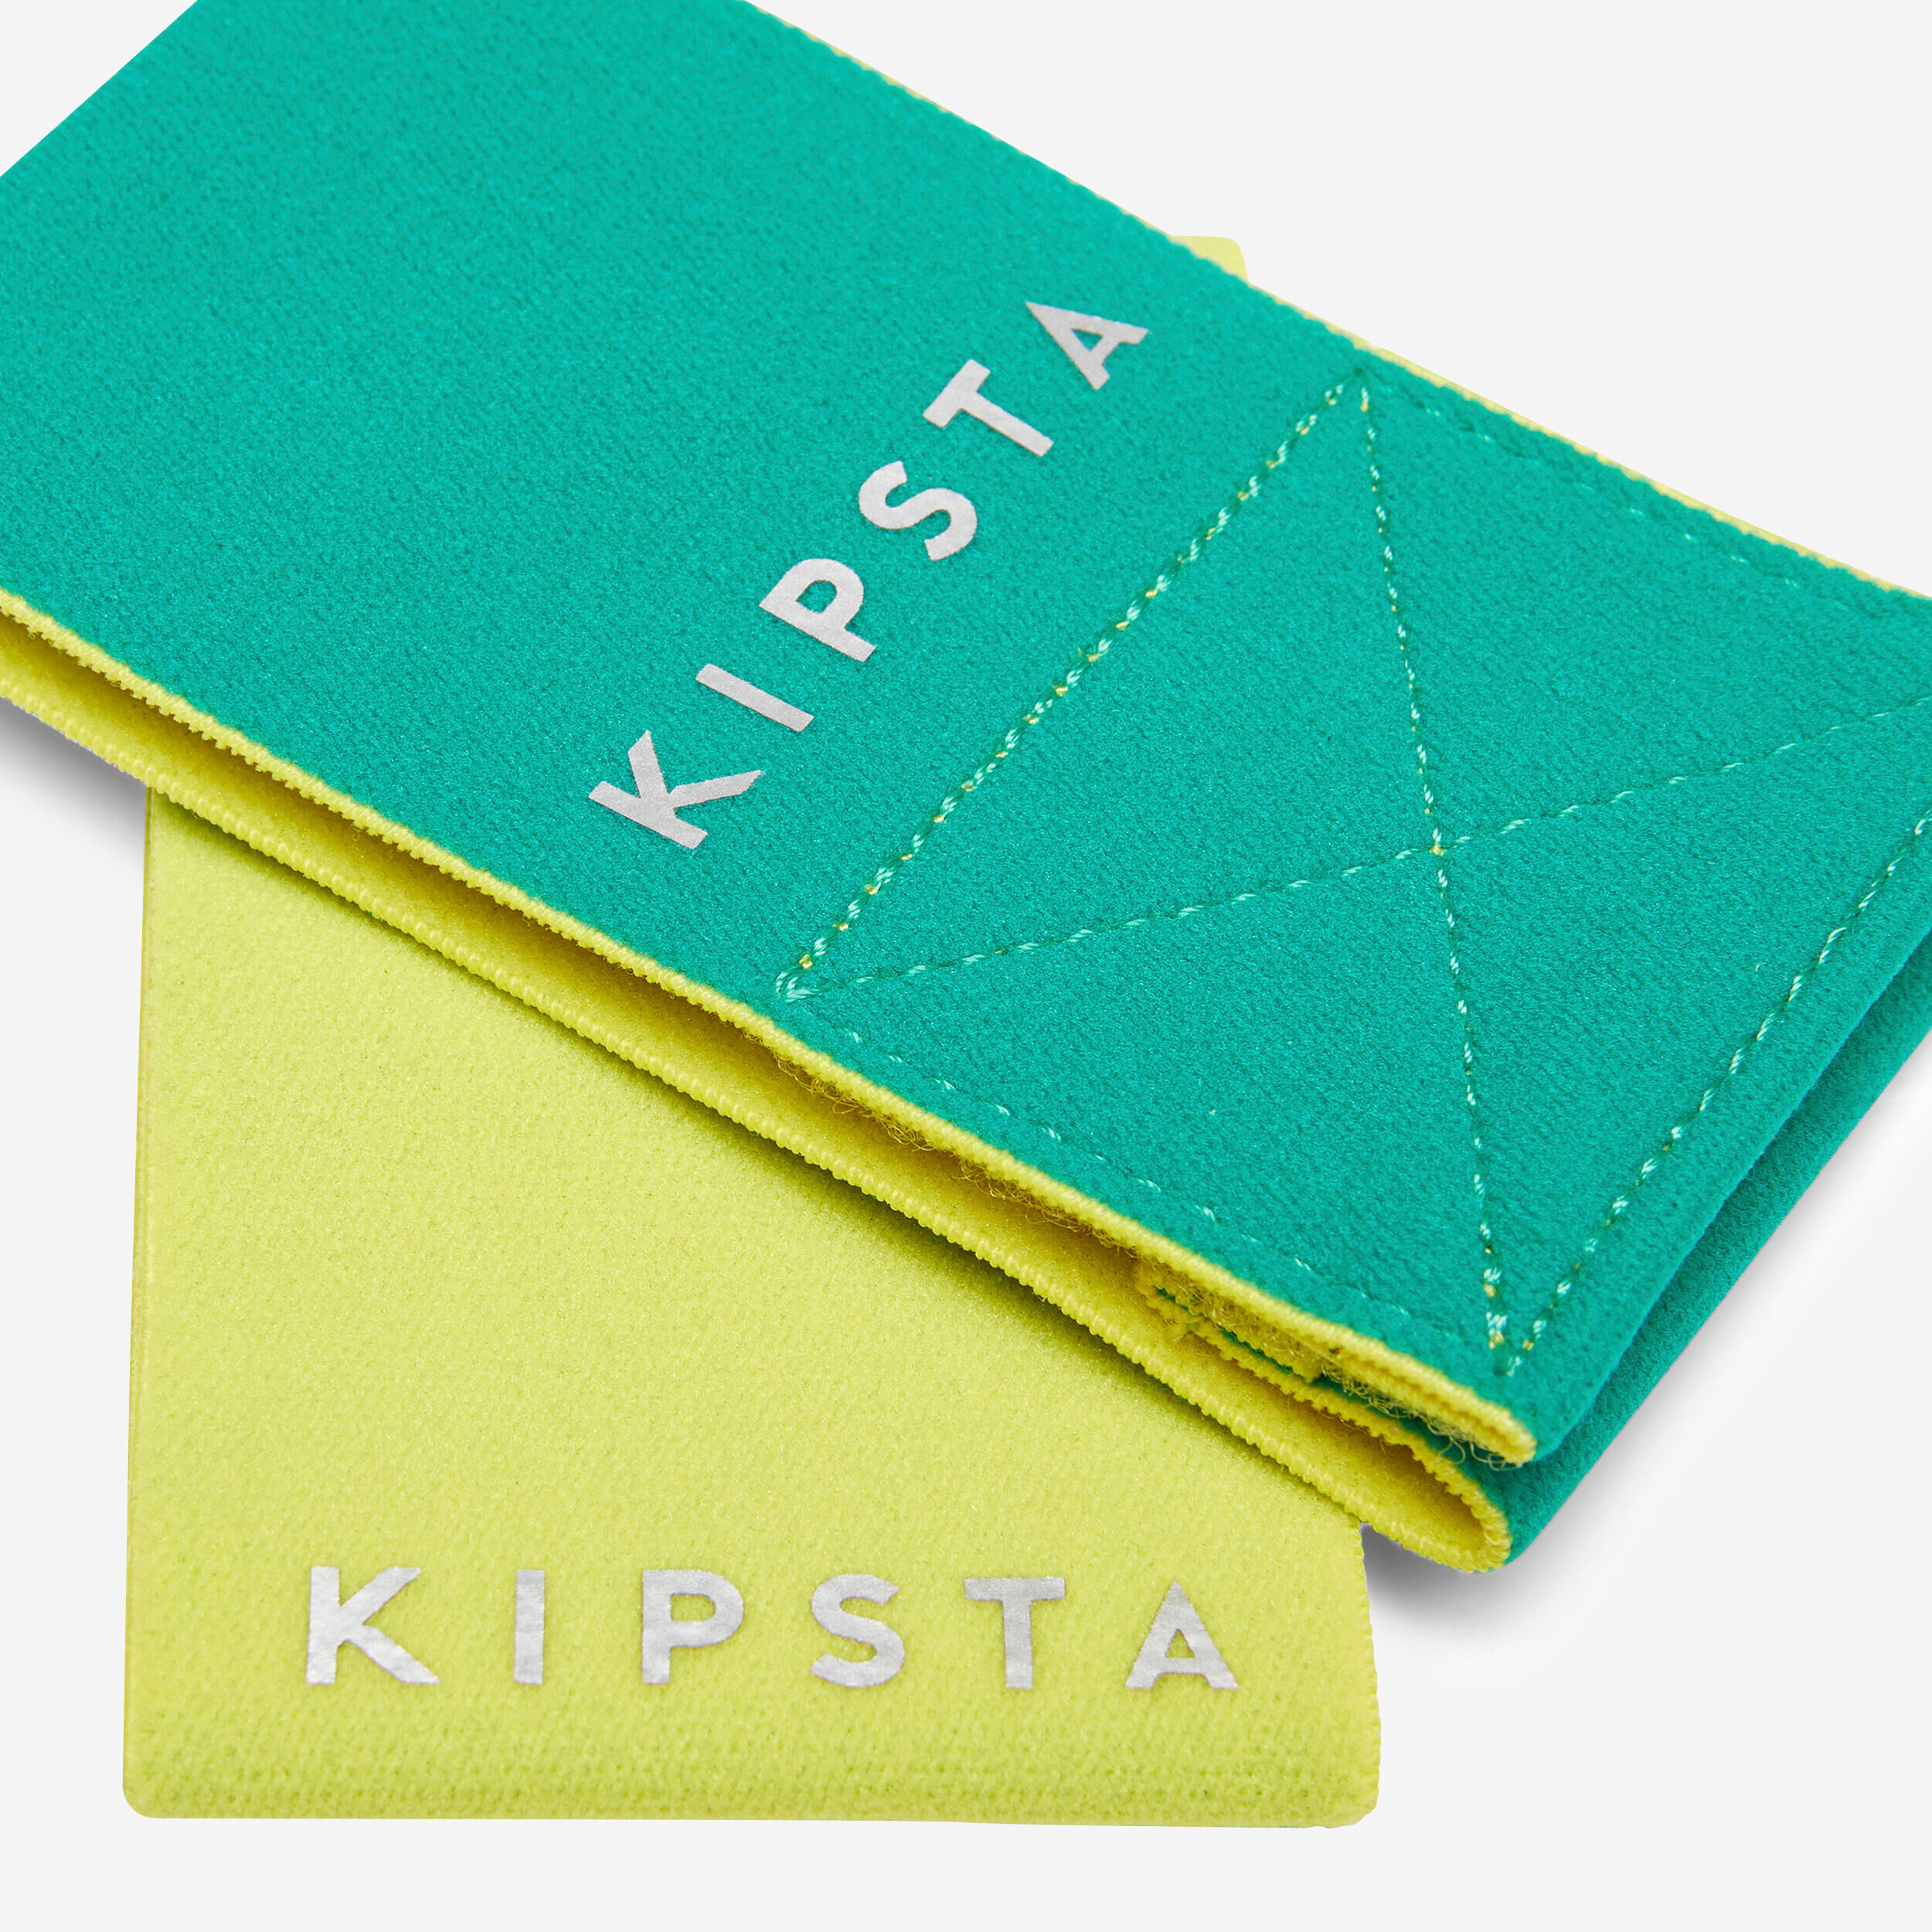 KIPSTA Reversible Support Strap - Yellow or Green